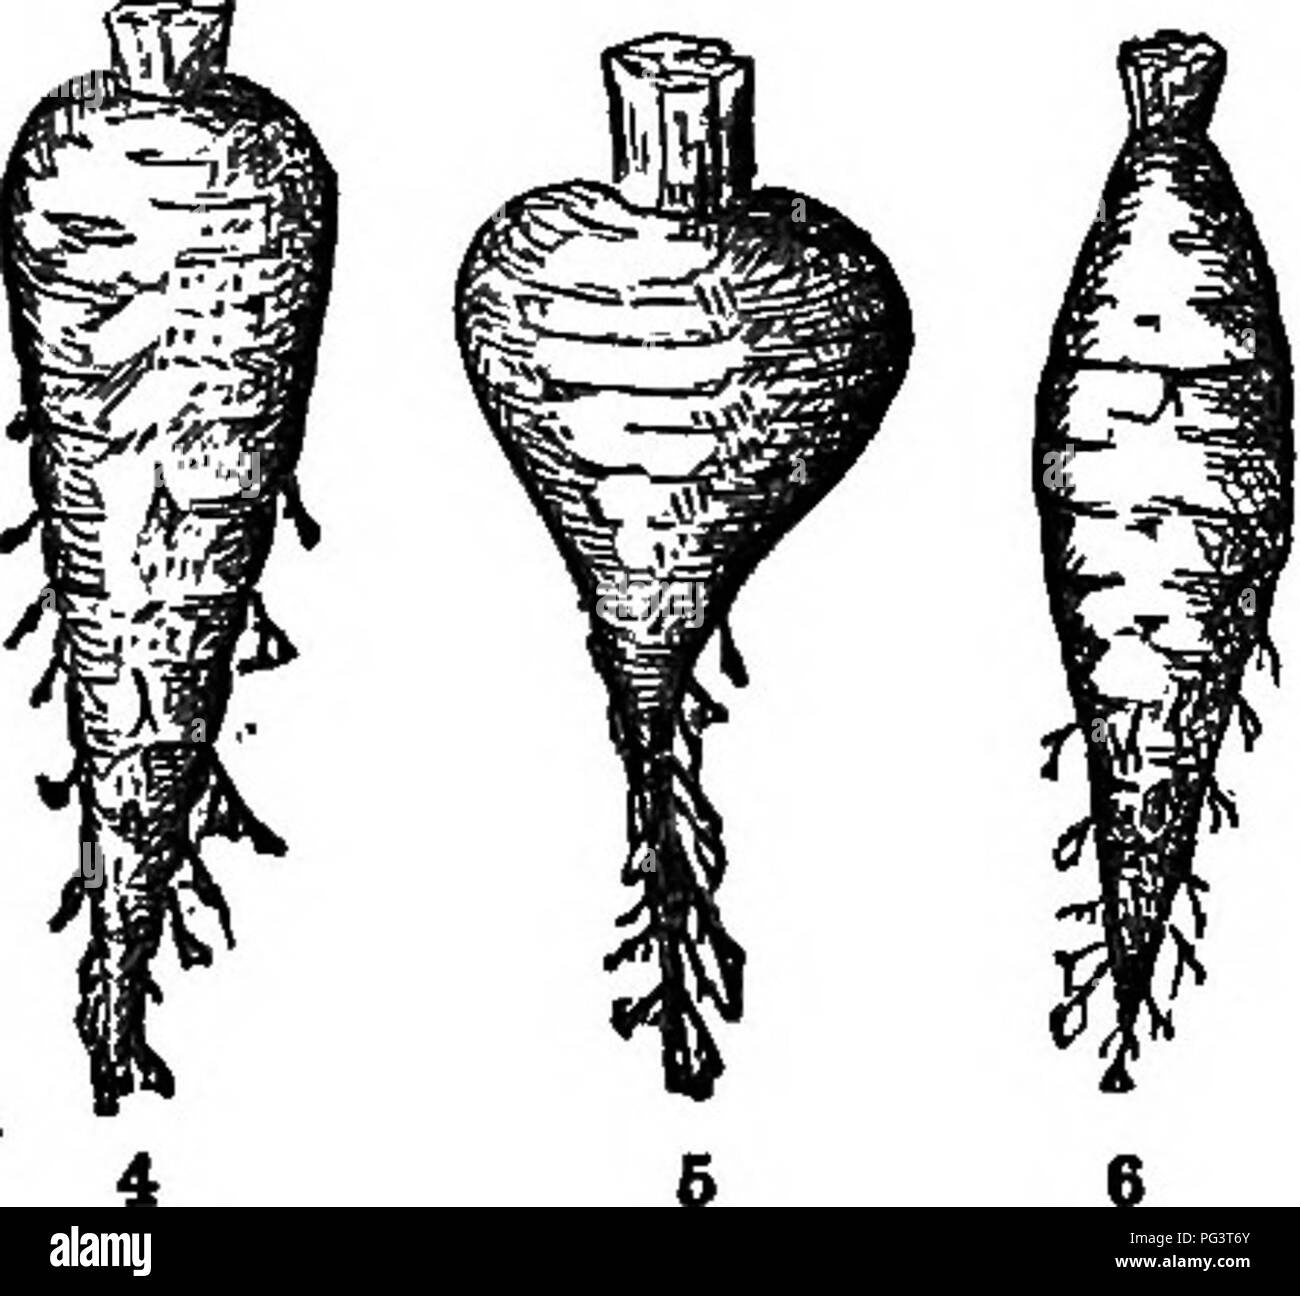 . The elements of botany embracing organography, histology, vegetable physiology, systematic botany and economic botany ... together with a complete glossary of botanical terms. Botany. 18 ORQANOGBAPHT.. it is napiform (Lat. napis, turnip; Fig. 5) ; when spindle- shaped, or thick in the middle, and tapering to both ends, it is said to be fusiform (Lat. fuds, spindle; Fig. 6). lo. There may grow from the plantlet, when a seed sprouts, several roots, instead of a single one, as in the Indian Corn, Wheat, Pea, etc. (Fig. 1, etc.) In such case they are called multiple primary roots. Sometimes they Stock Photo